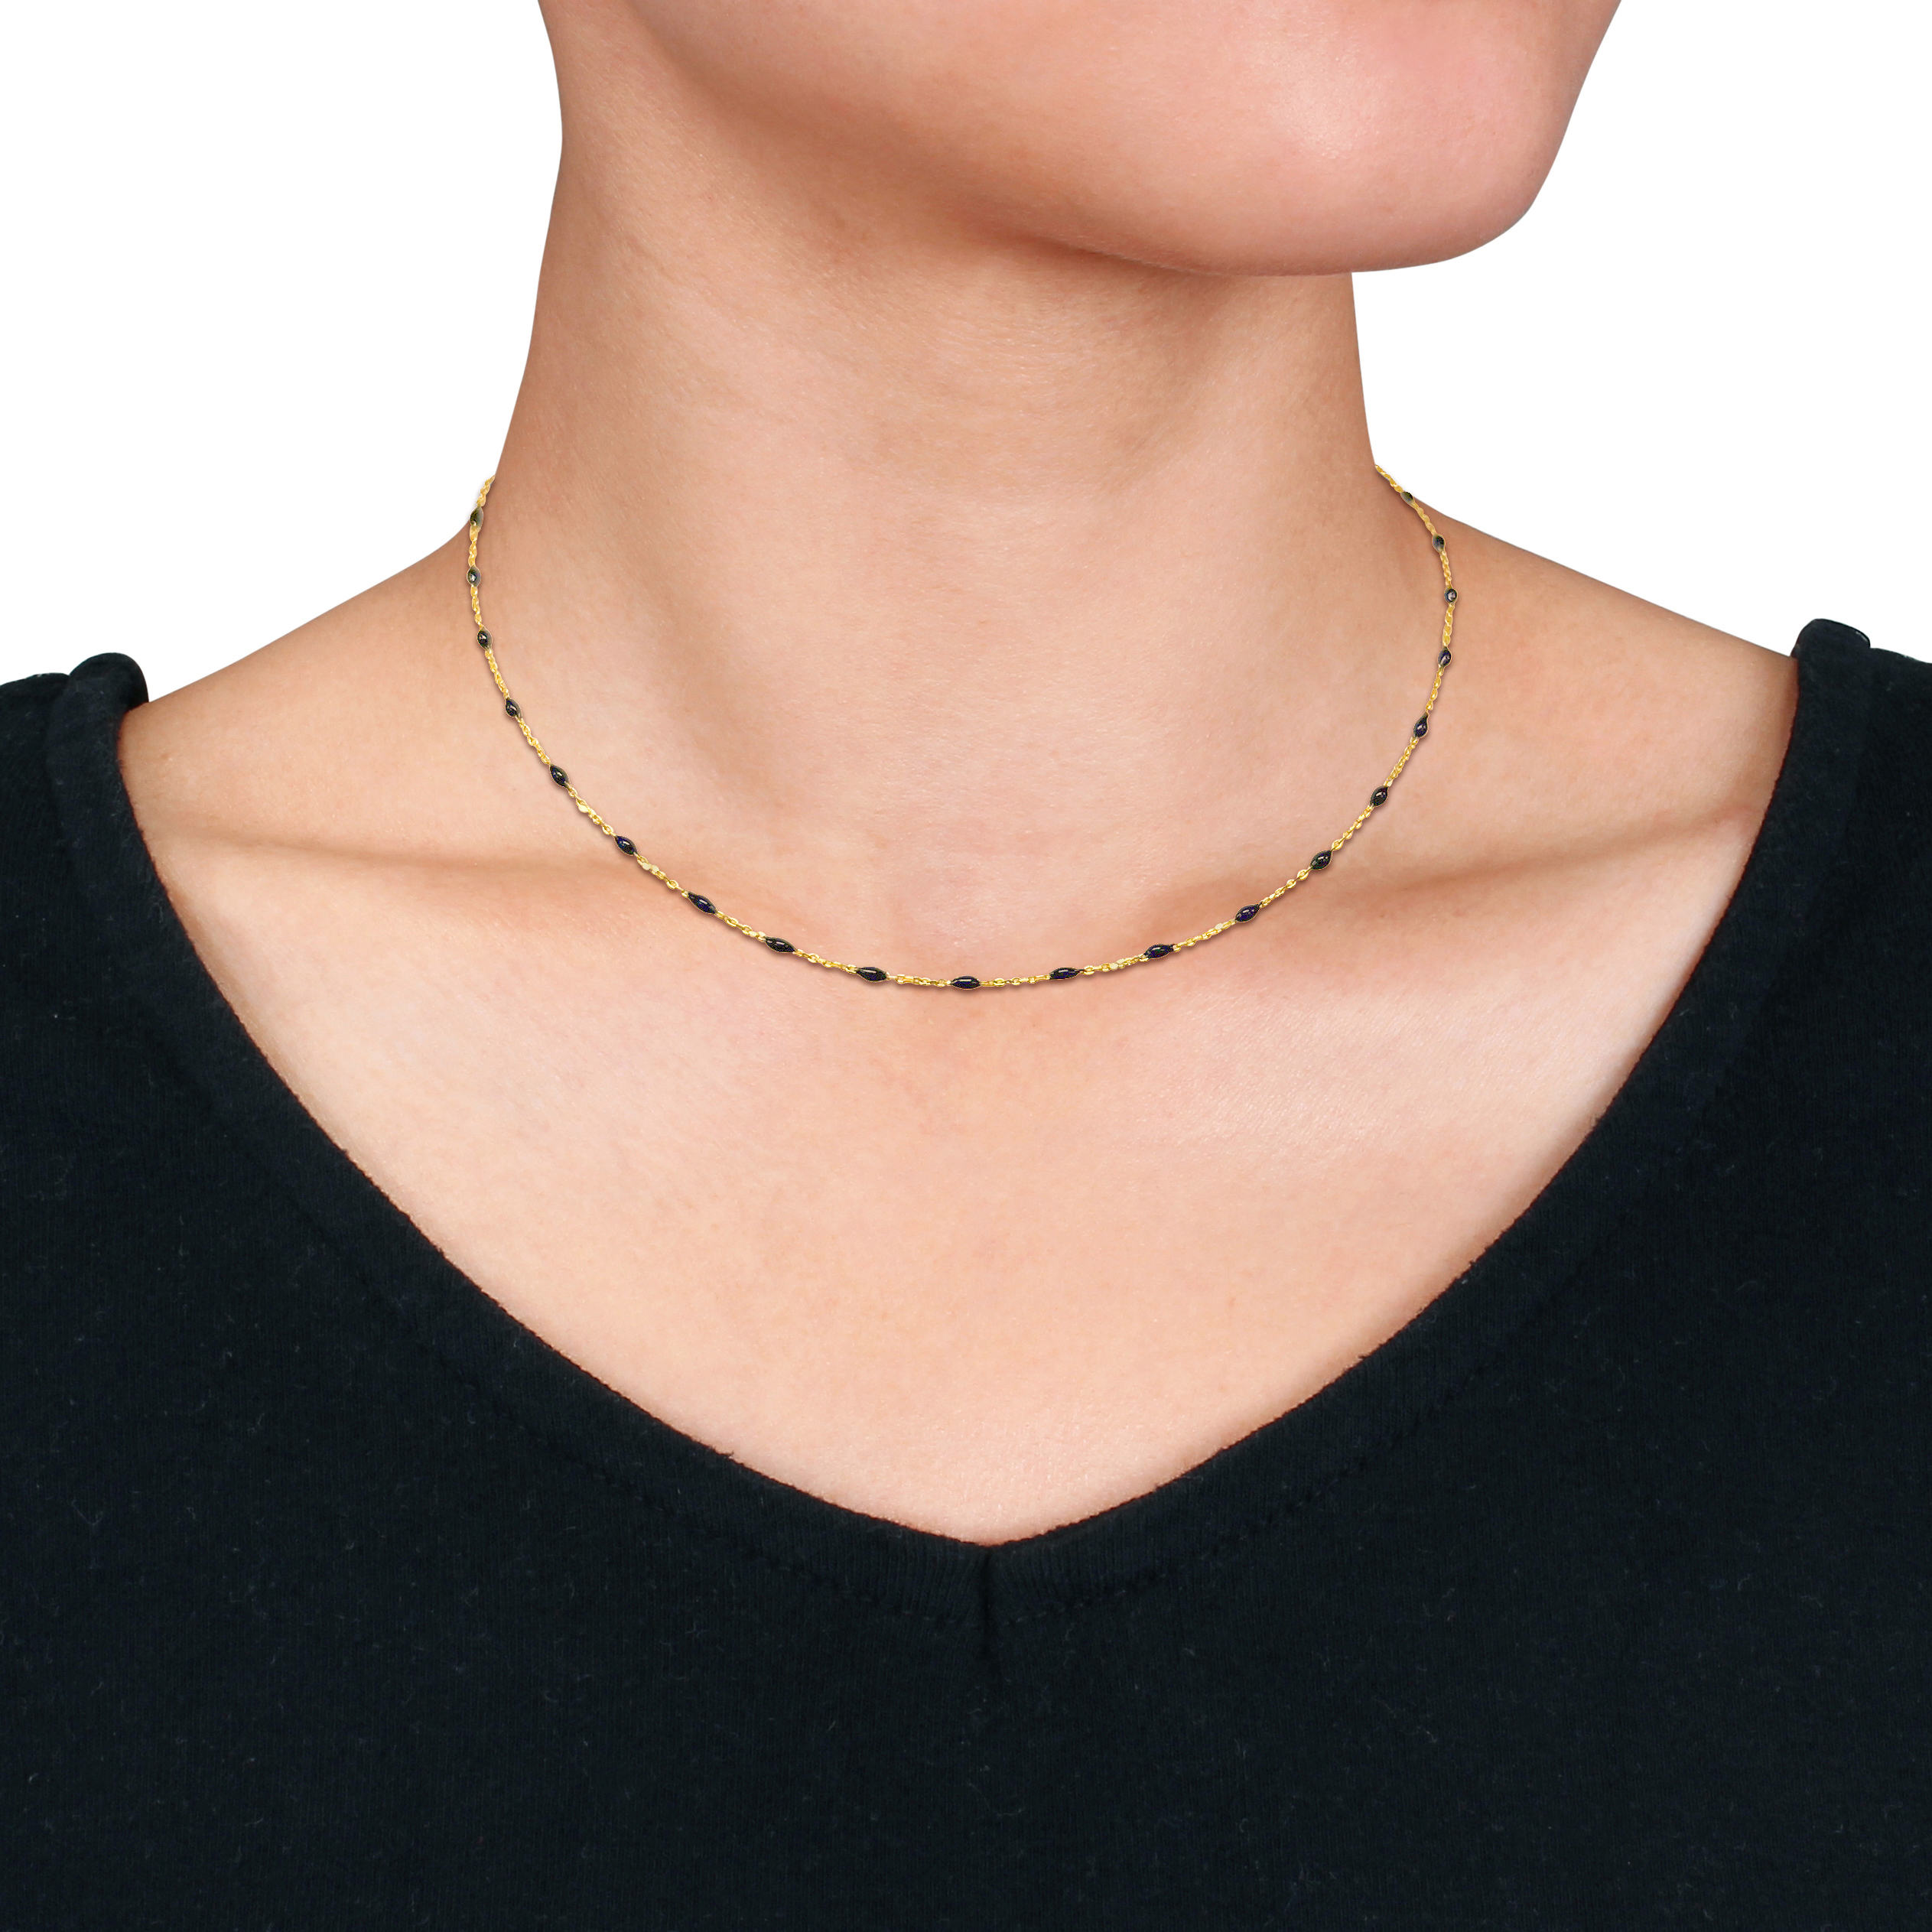 Black Enamel Station Necklace in 14K Yellow Gold - 16+2 in.